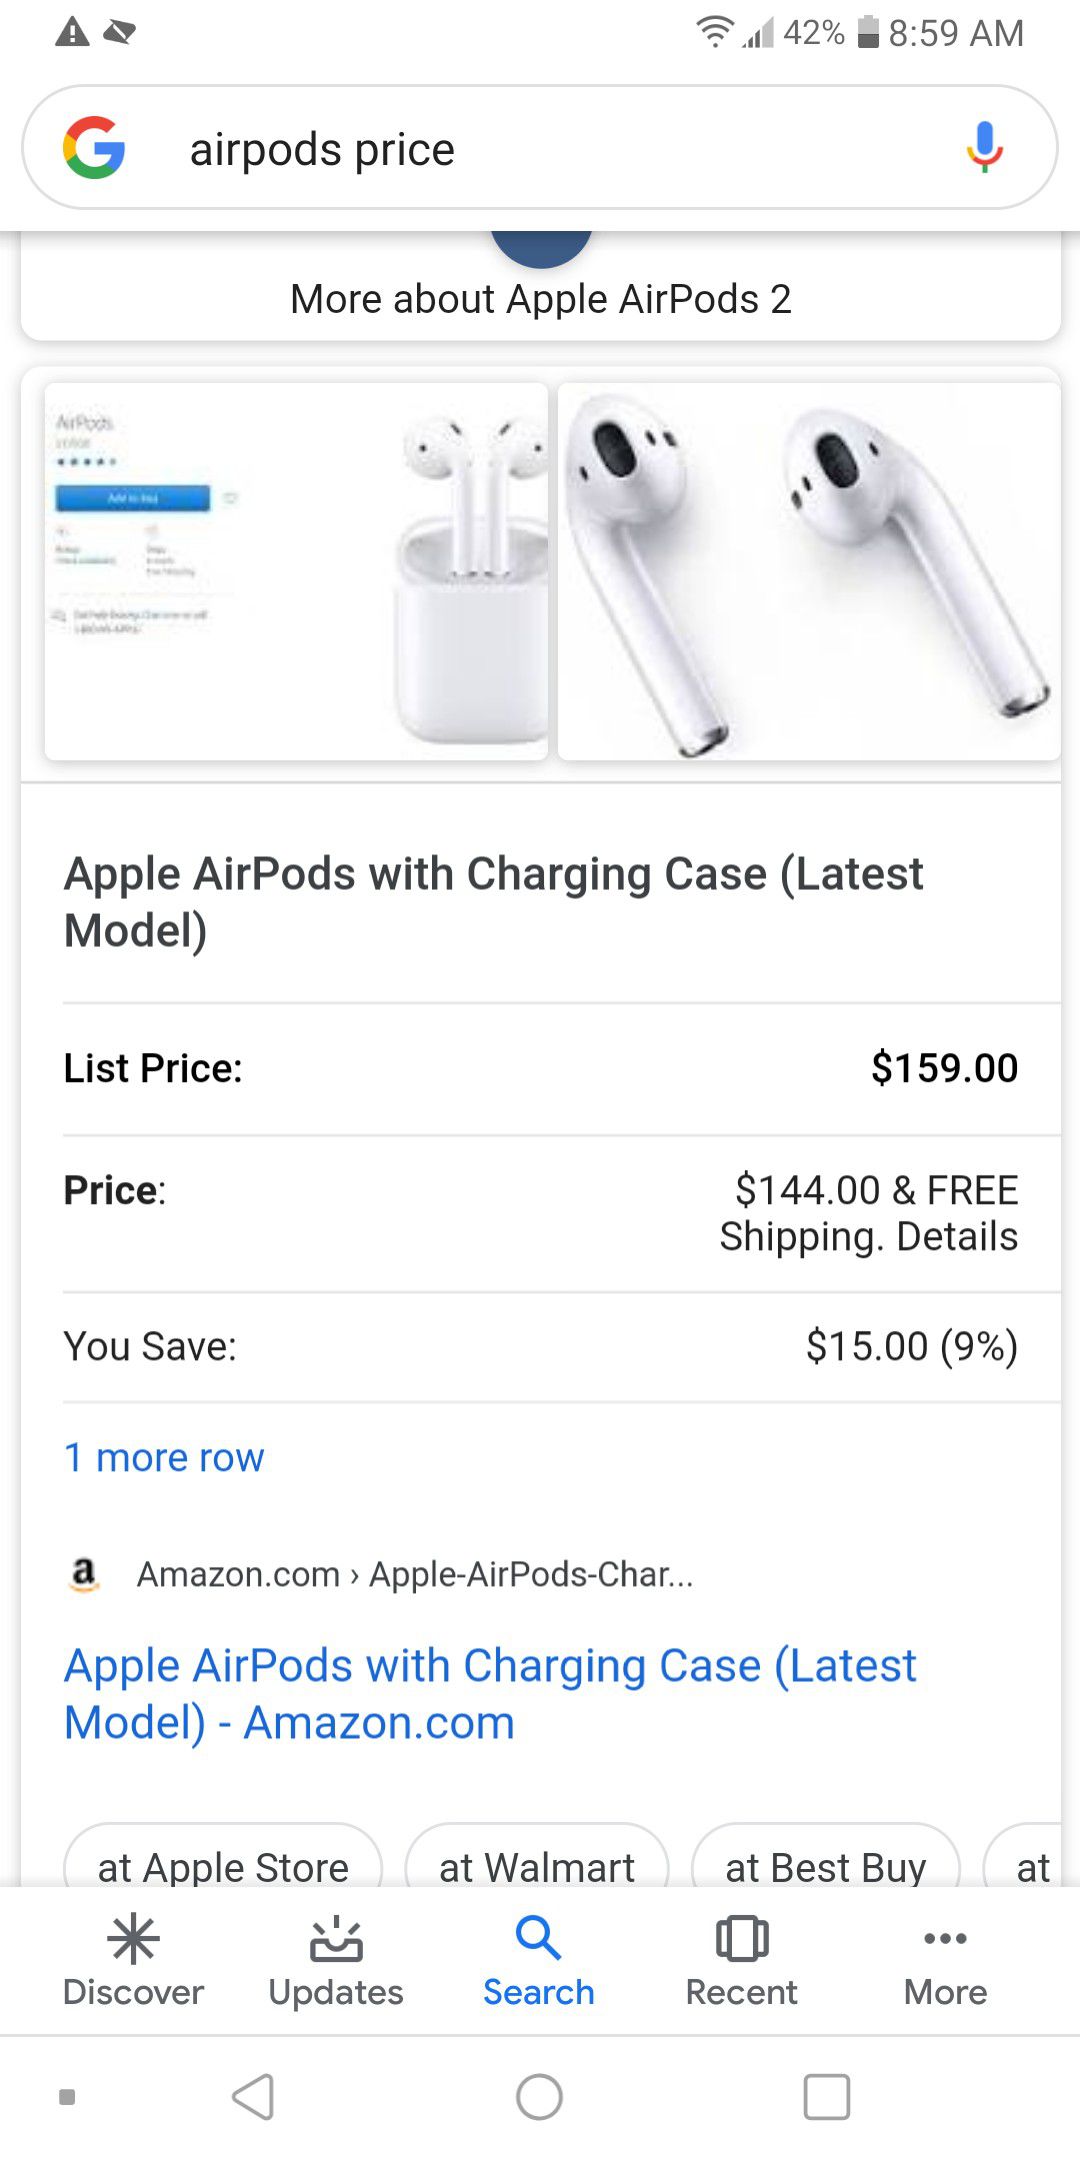 Airpods wireless headphones with charger